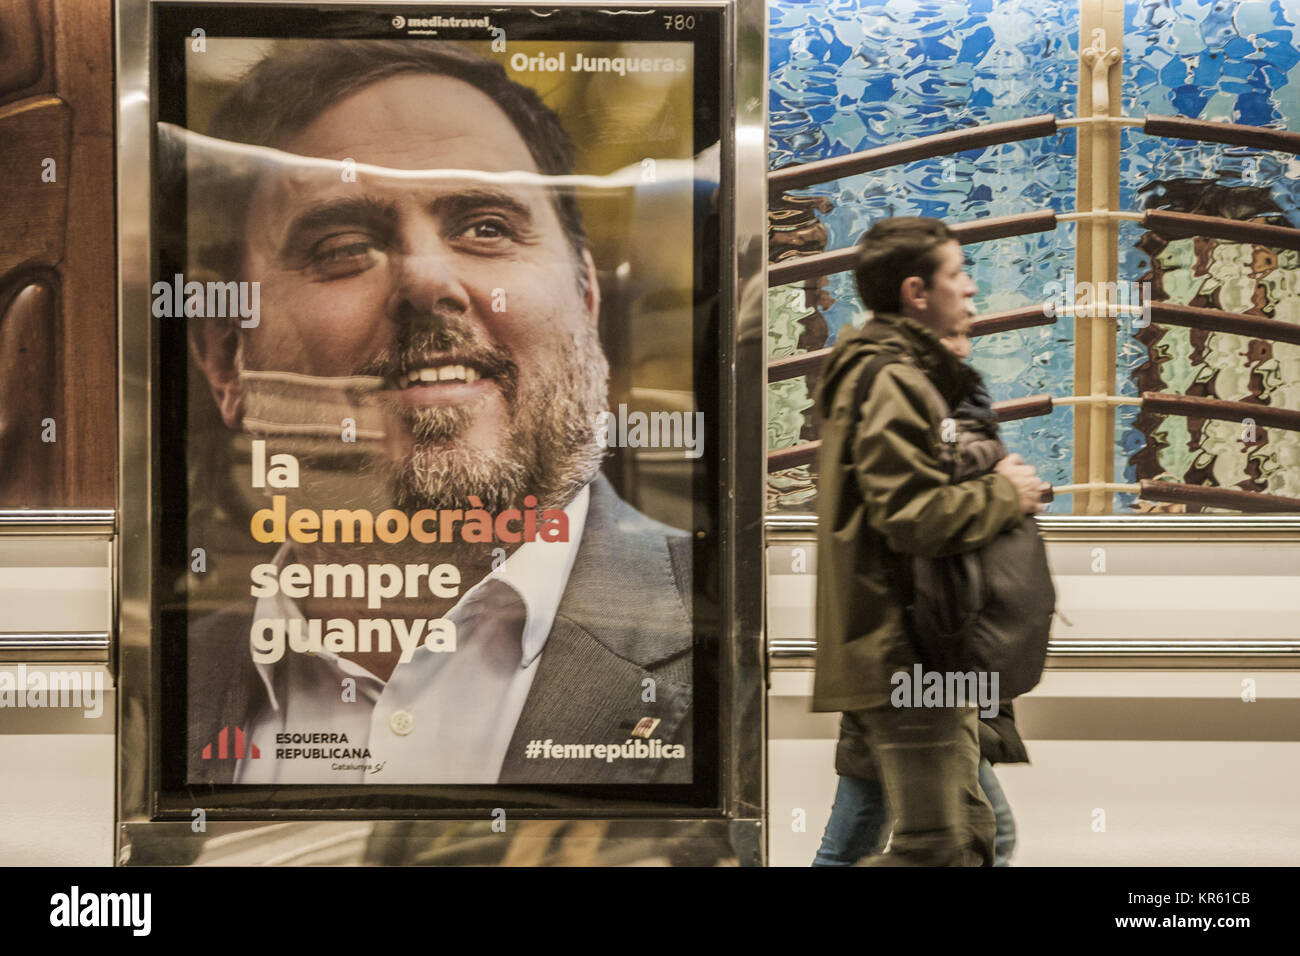 Barcelona, Spain. December 18, 2017 - Barcelona, CataluÃ±a, Spain - Banner in the metro with the image of Oriol Junqueras, candidate of the ''Esquerra Republicana'' party for the catalan elections. Oriol Junqueras is still in jail because the independence proclaim of the independentist parties in the Parlament. Credit: Celestino Arce/ZUMA Wire/Alamy Live News Stock Photo